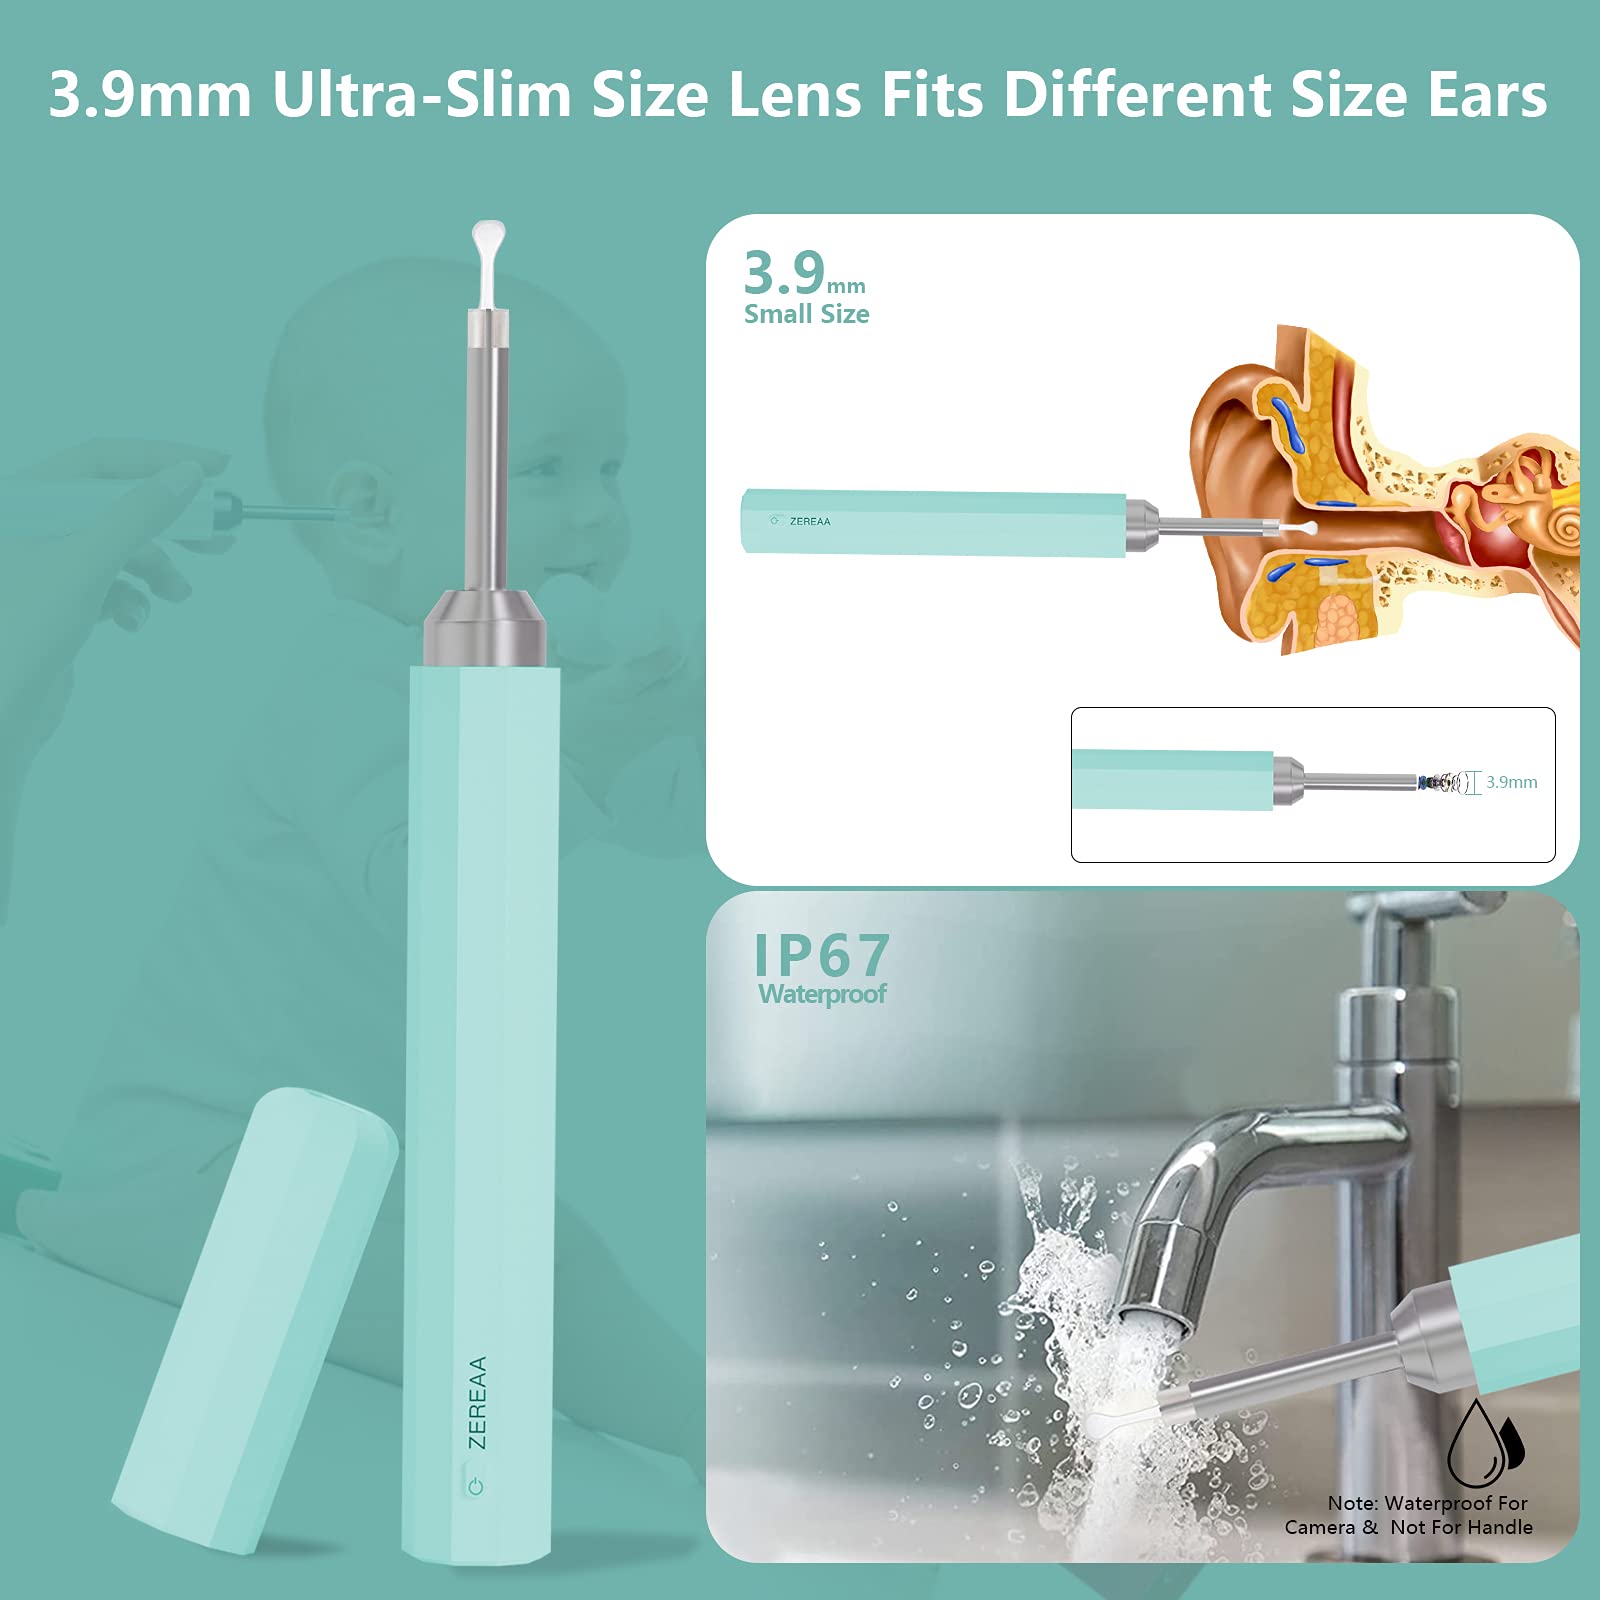 Ear Wax Removal, Ear Cleaner, Earwax Remover Tool with 1080P FHD, Wireless Endoscope Ear Camera Ear Pick Cleaning Kit, USB Charge Waterproof Otoscope for iPhone, iPad & Android Smart Phones